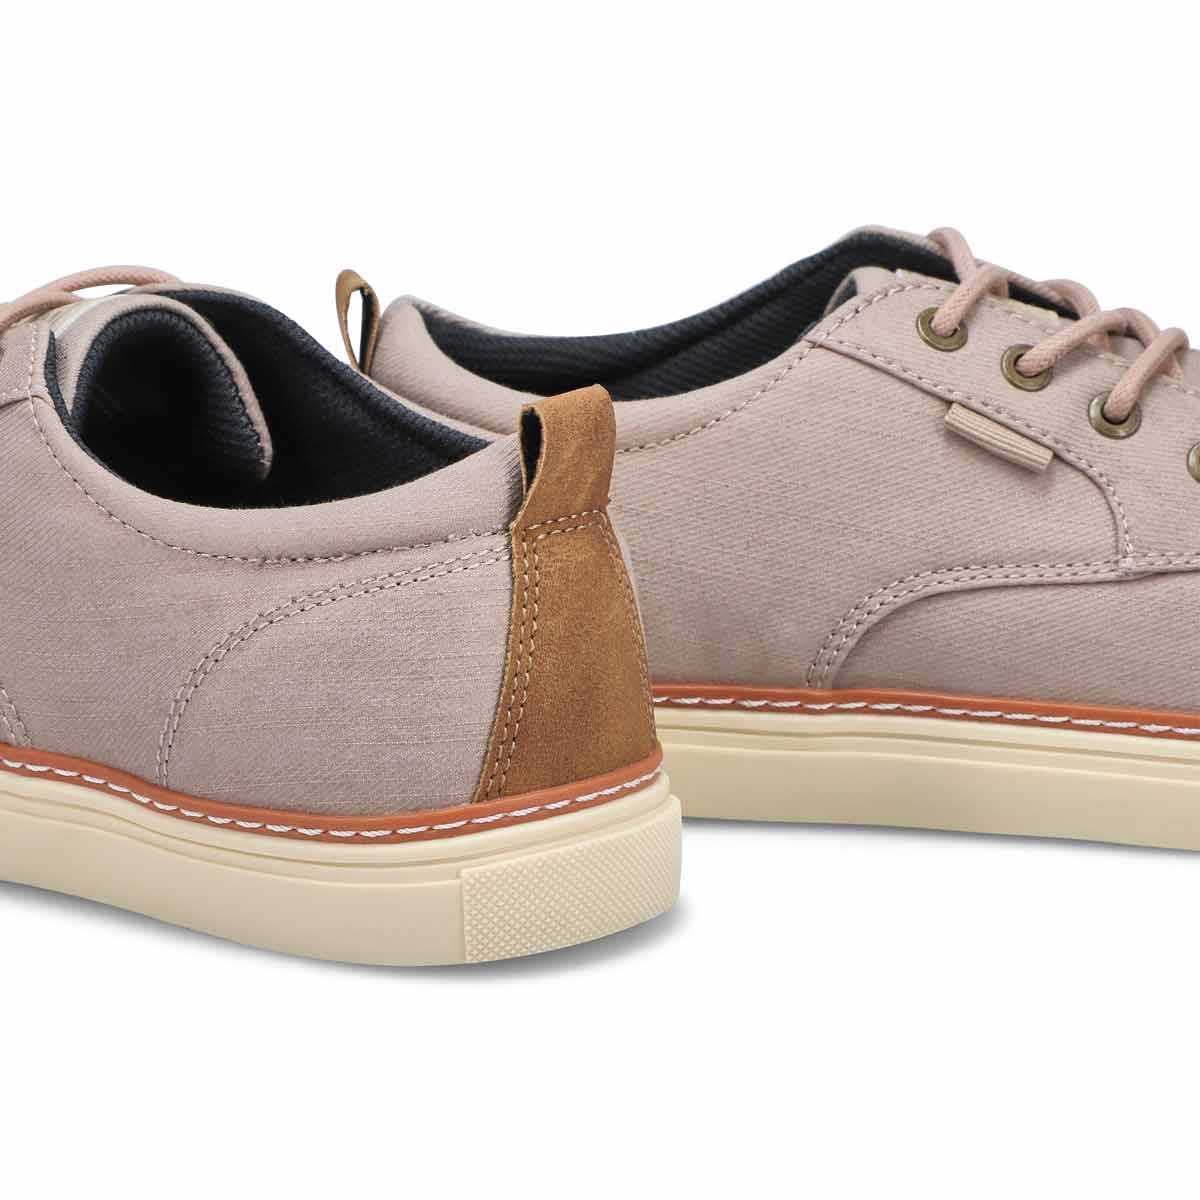 Men's Beasley Canvas Casual Oxford - Taupe